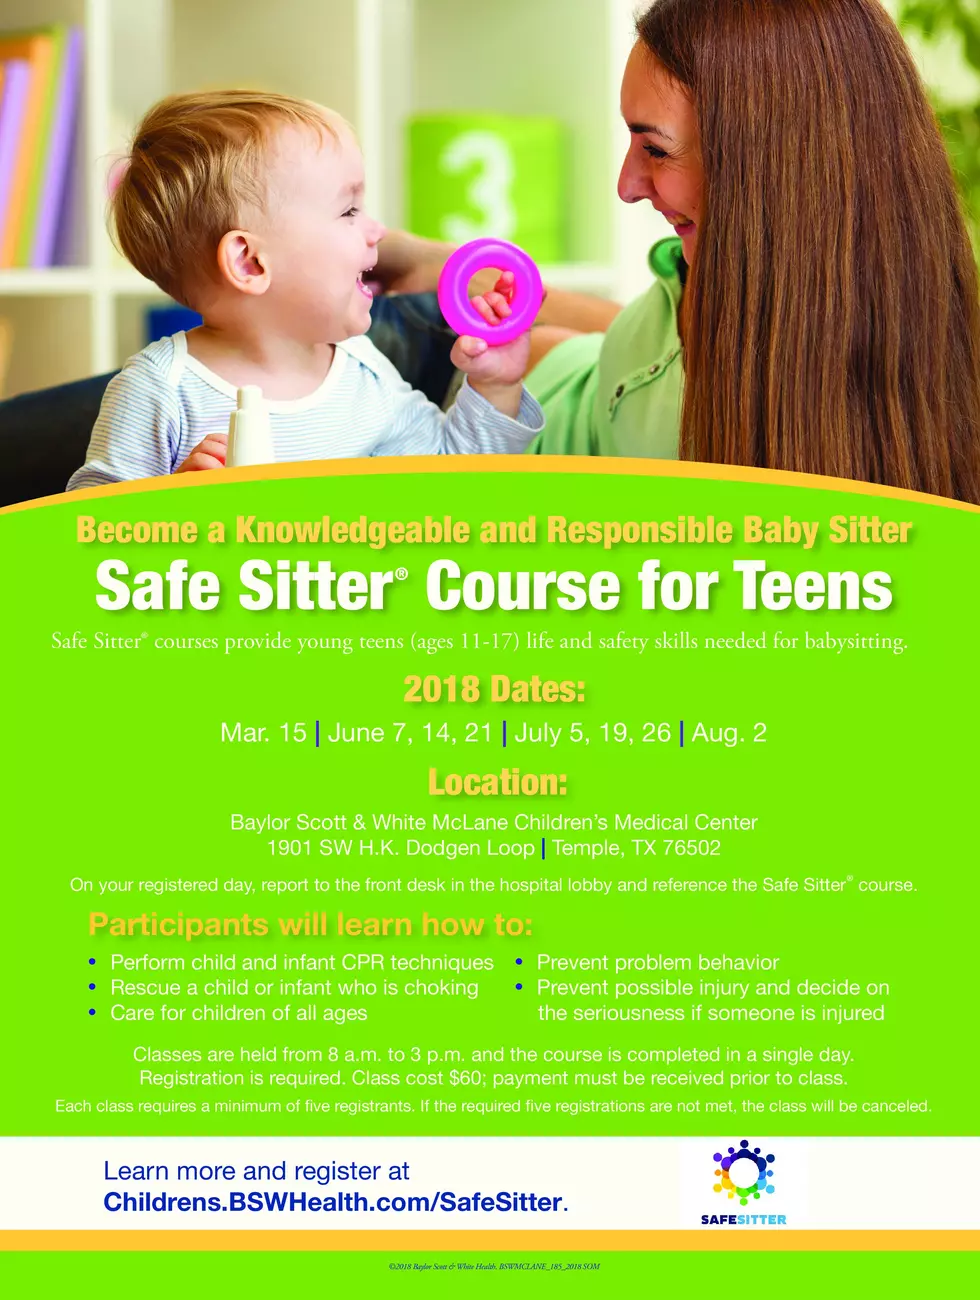 Safe Sitter Course offered for Teens in Temple!